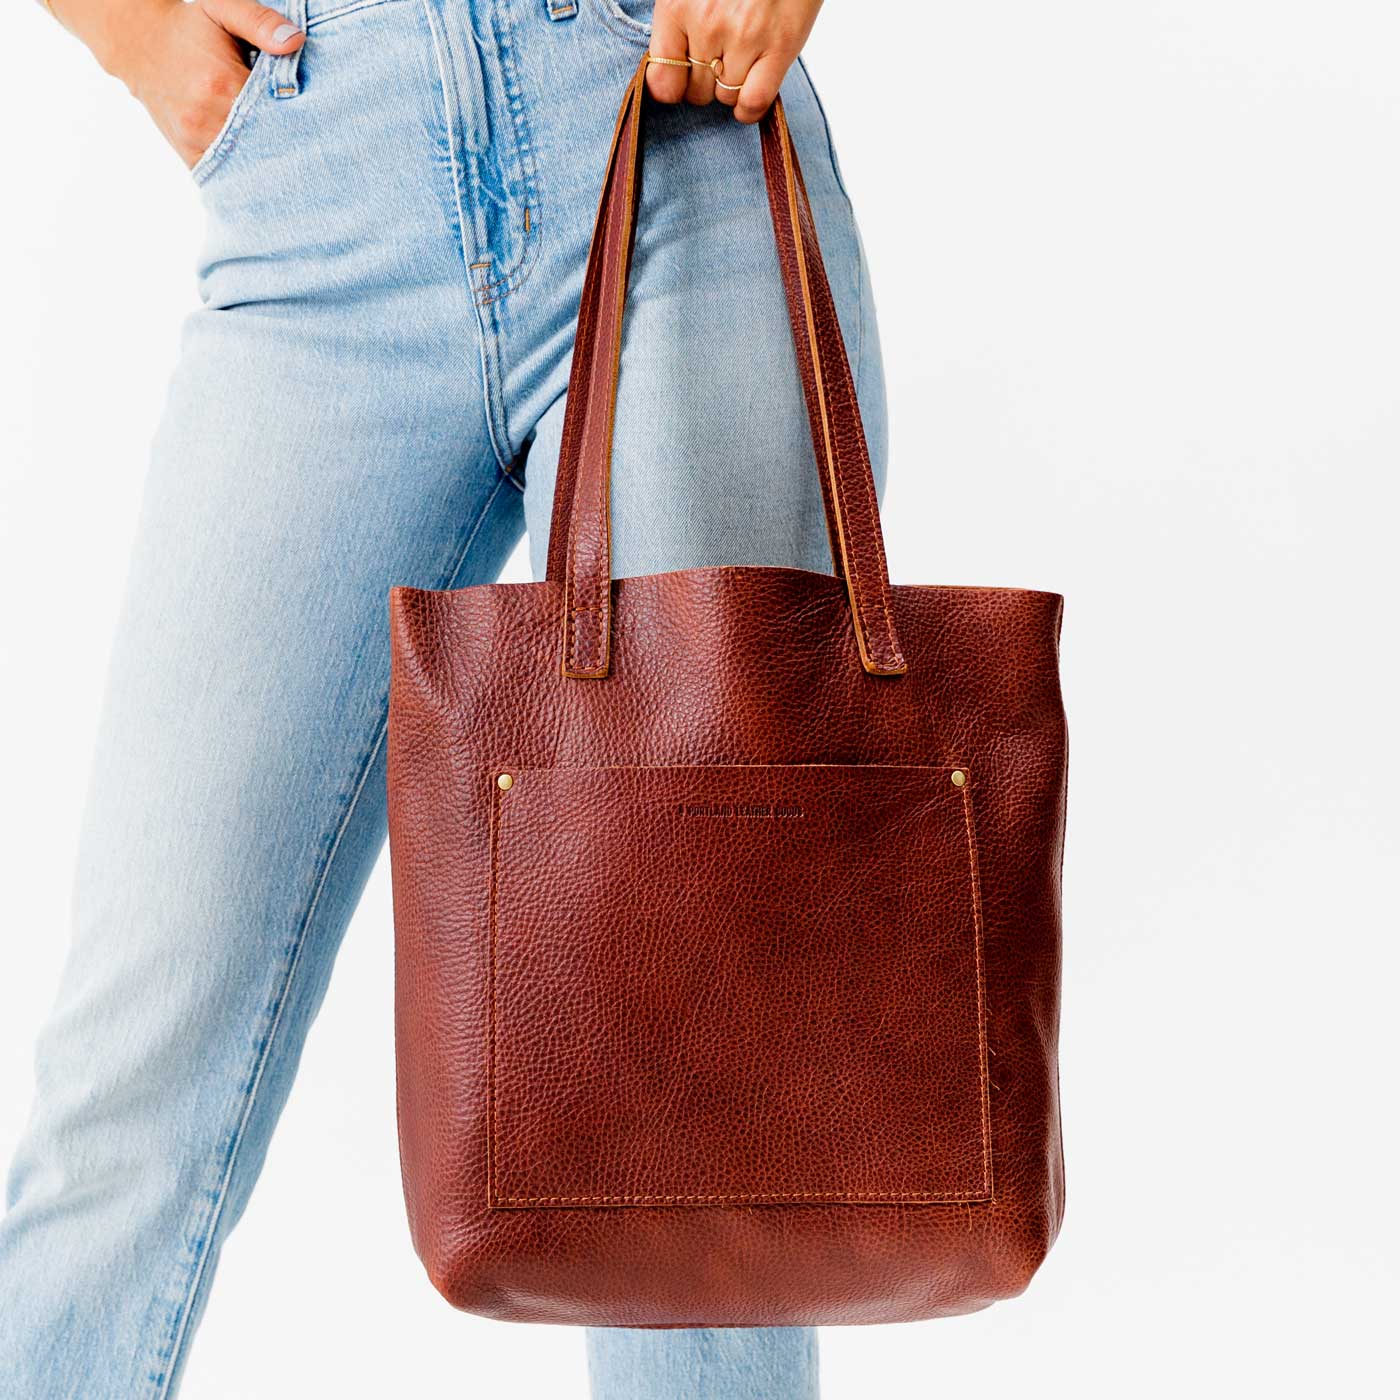  Nutmeg | Medium Tote with dual shoulder straps and crossbody strap